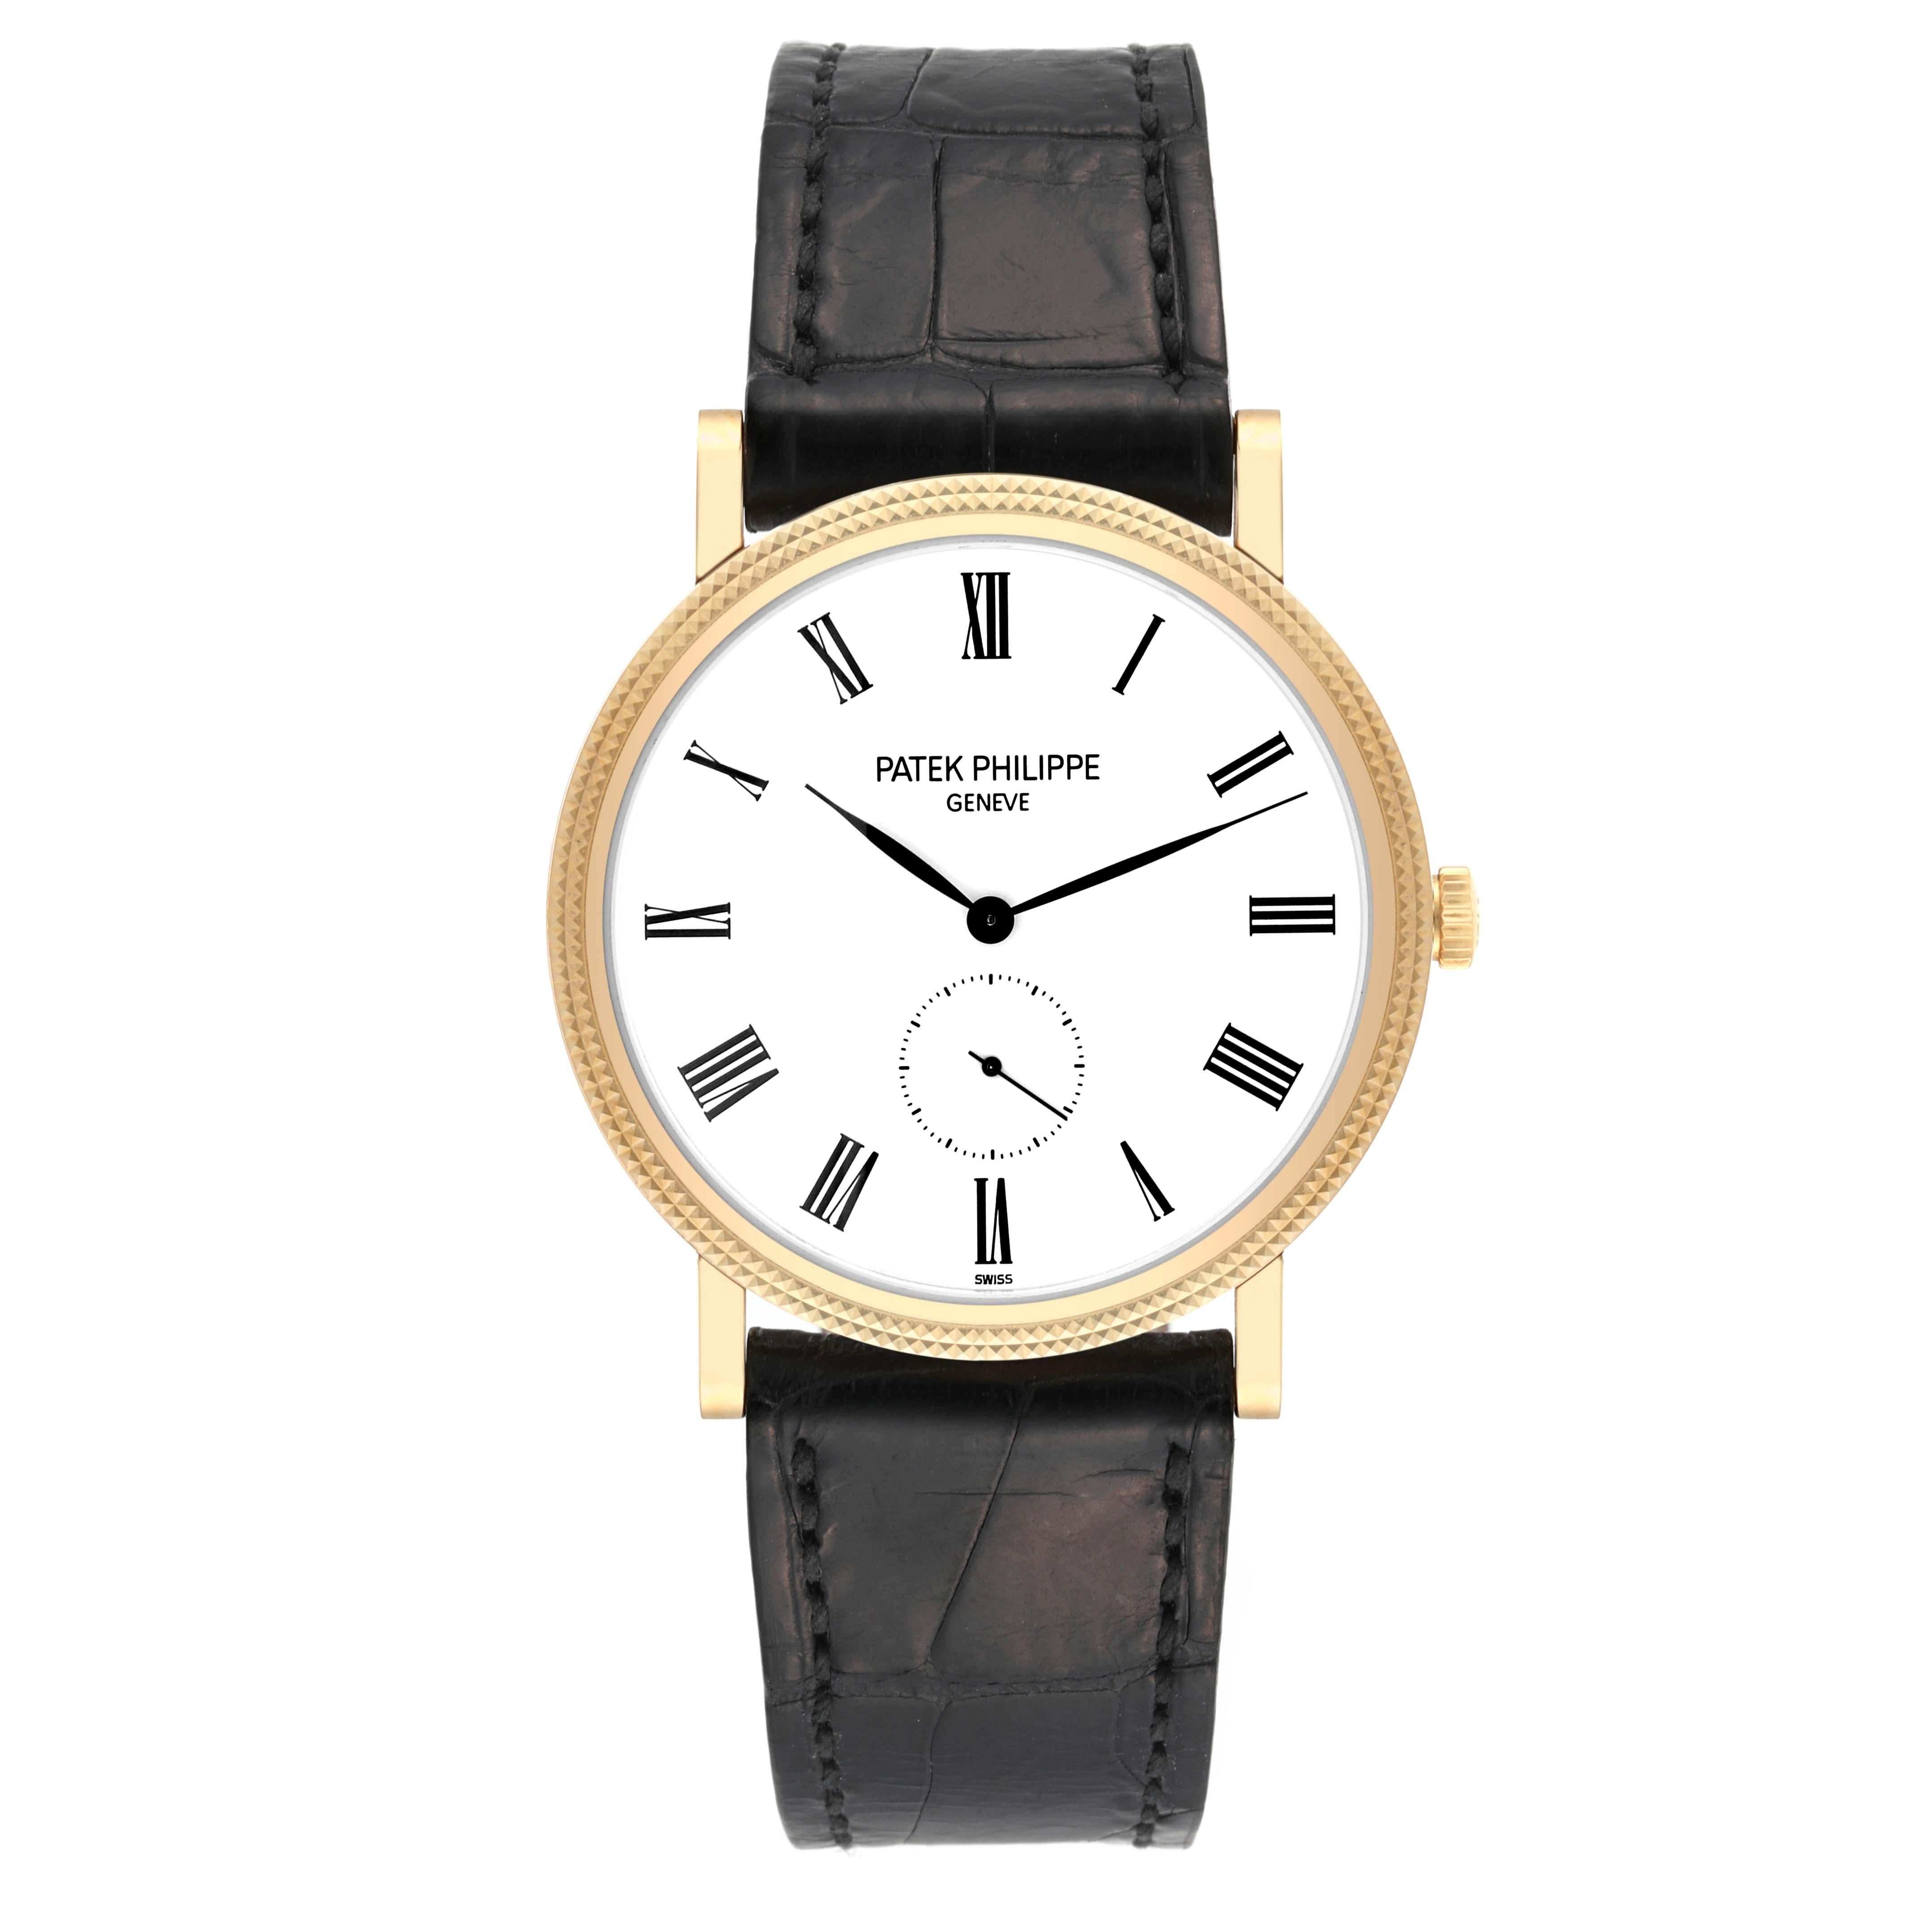 Patek Philippe Calatrava Yellow Gold White Dial Mens Watch 5119. Manual-winding movement. 18k yellow gold case 36.0 mm in diameter. Transparent exhibition sapphire crystal caseback. 18k yellow gold hobnail bezel. Scratch resistant sapphire crystal.